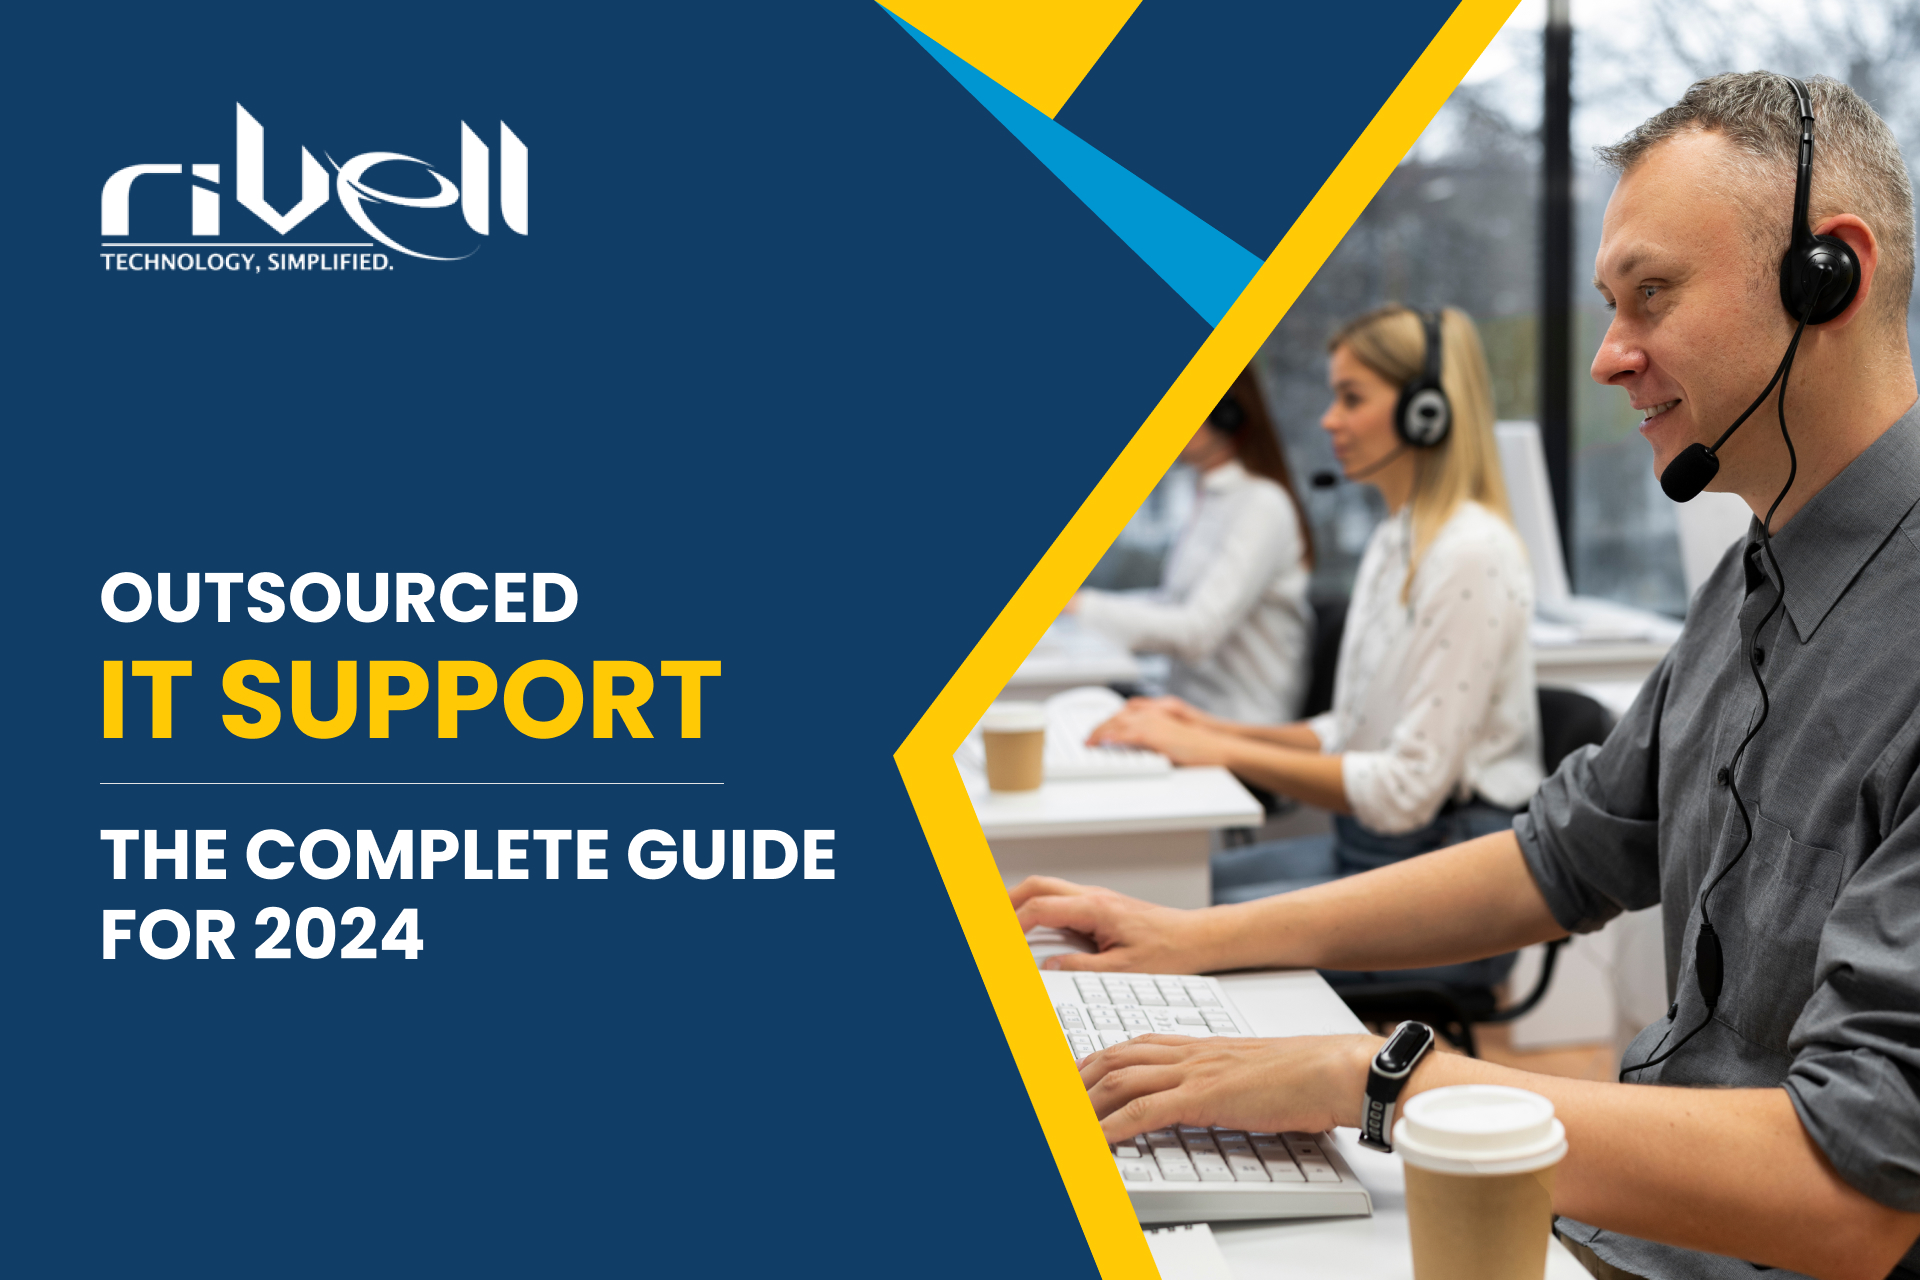 Outsourced IT Support The complete guide for 2024